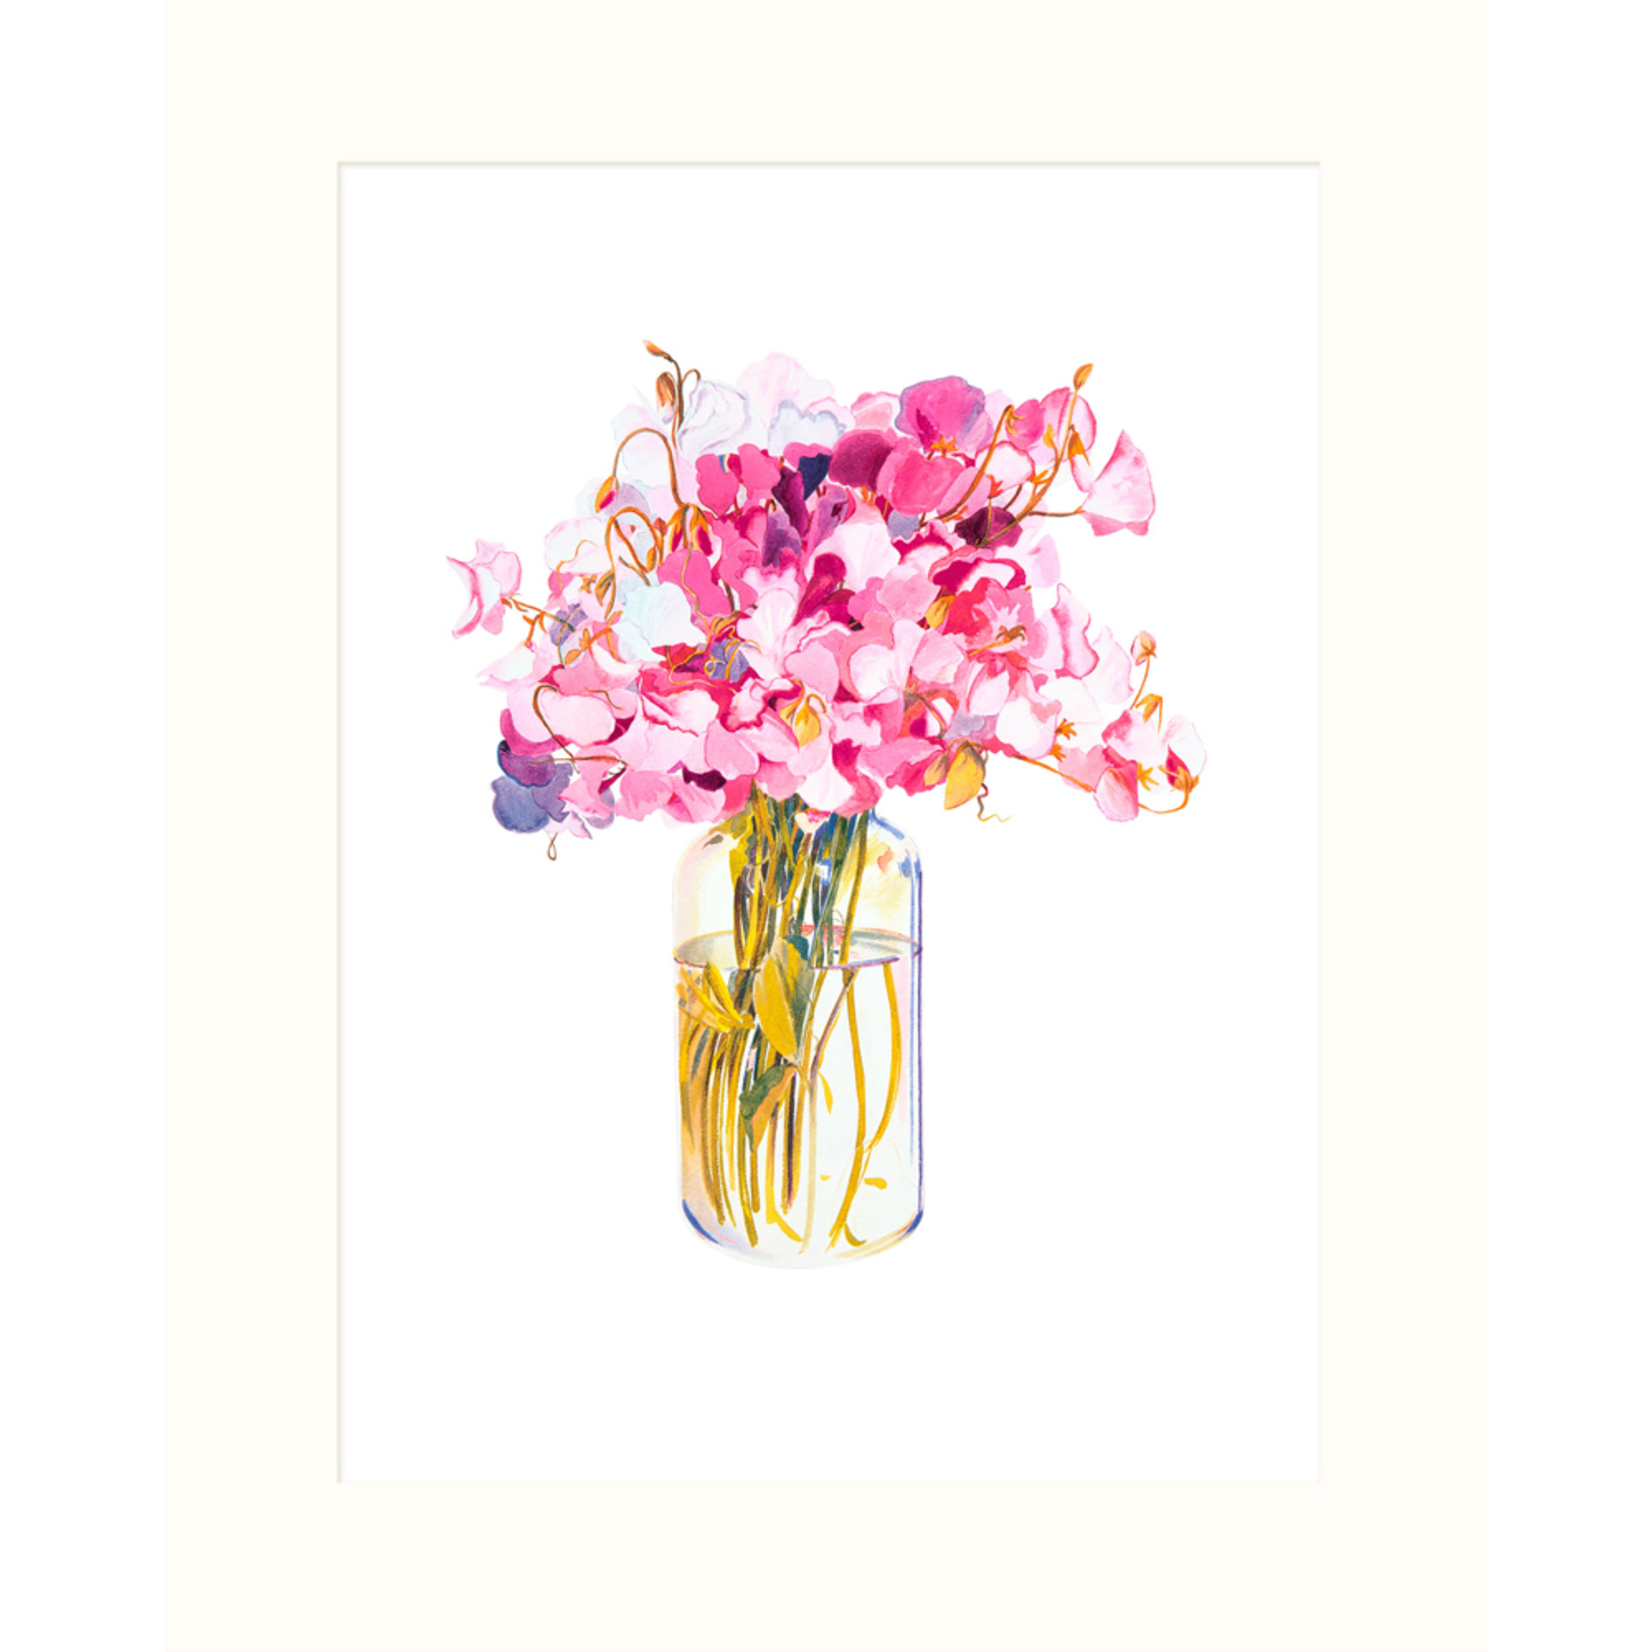 Limited Edition Prints Sweetpeas, 1979